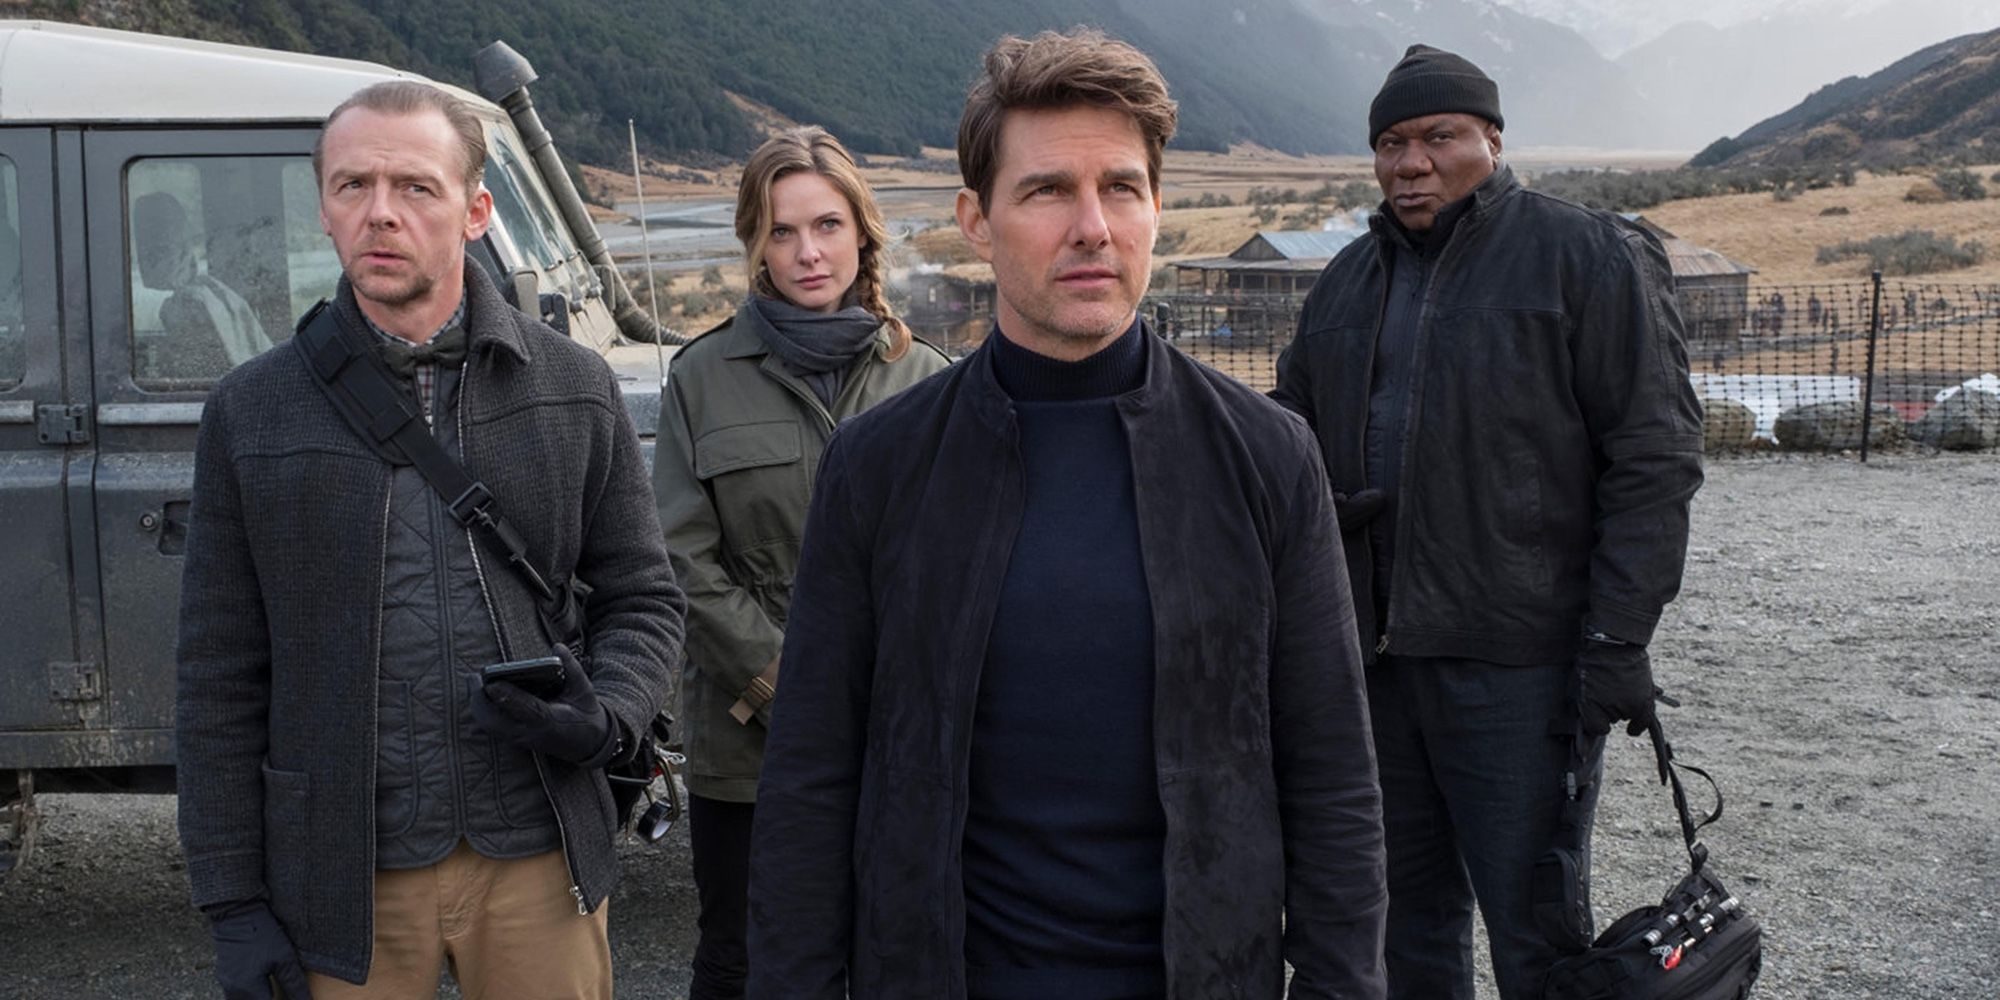 mission-impossible-cast-2-2874306